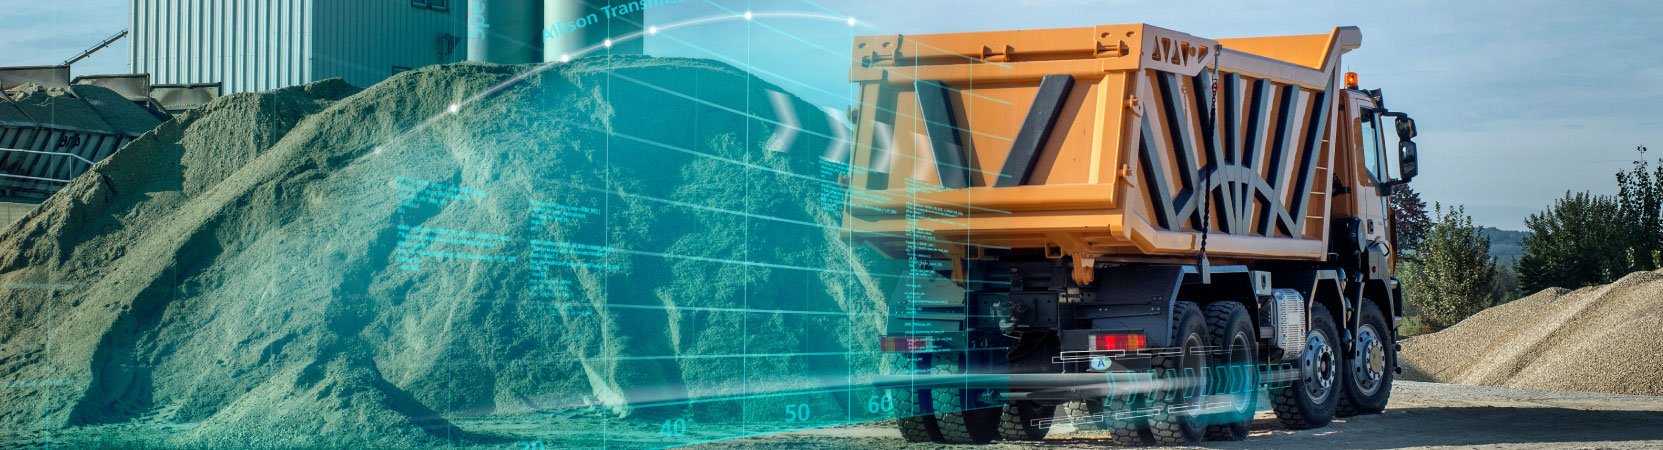 An orange dump truck travels on a gravel path near in an aggregate facility. Blue lines and shading shoot from the back of the dump truck to show movement.